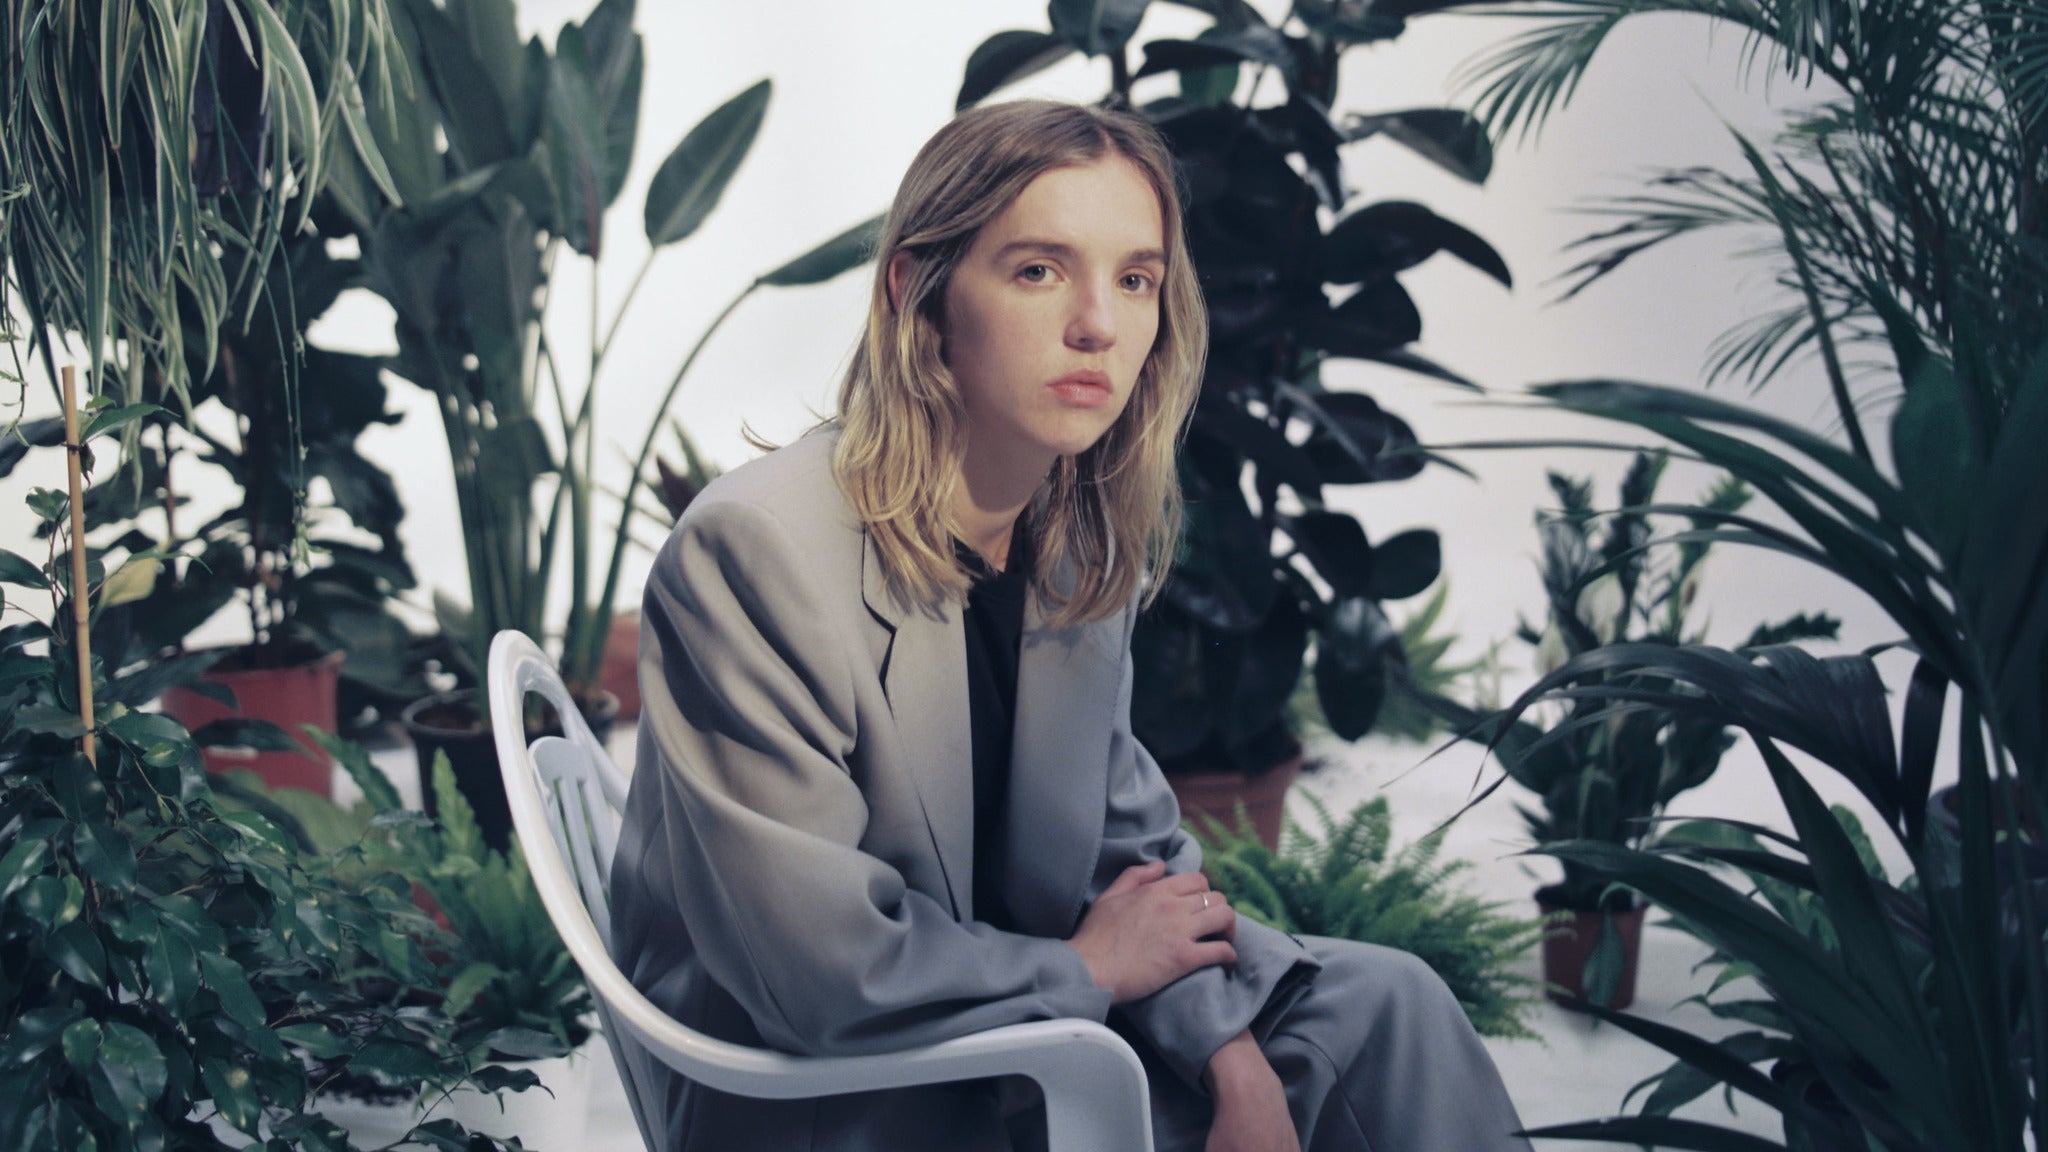 The Japanese House in Columbus promo photo for Spotify presale offer code